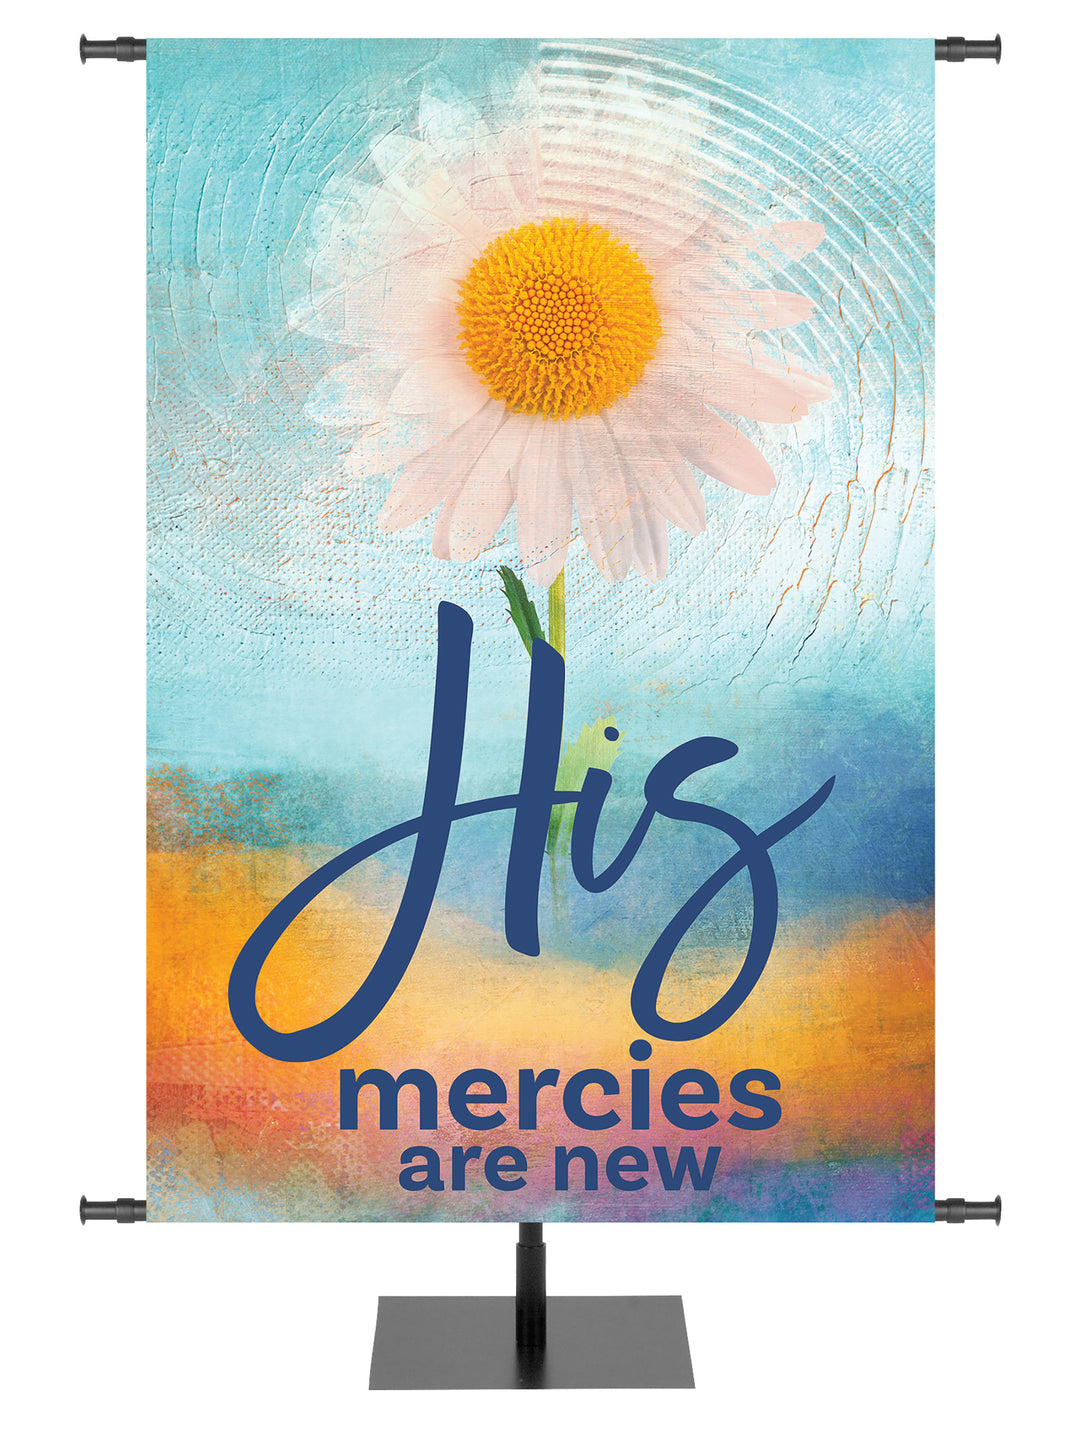 A Joyous Spring His Mercies Are New with spring daisy